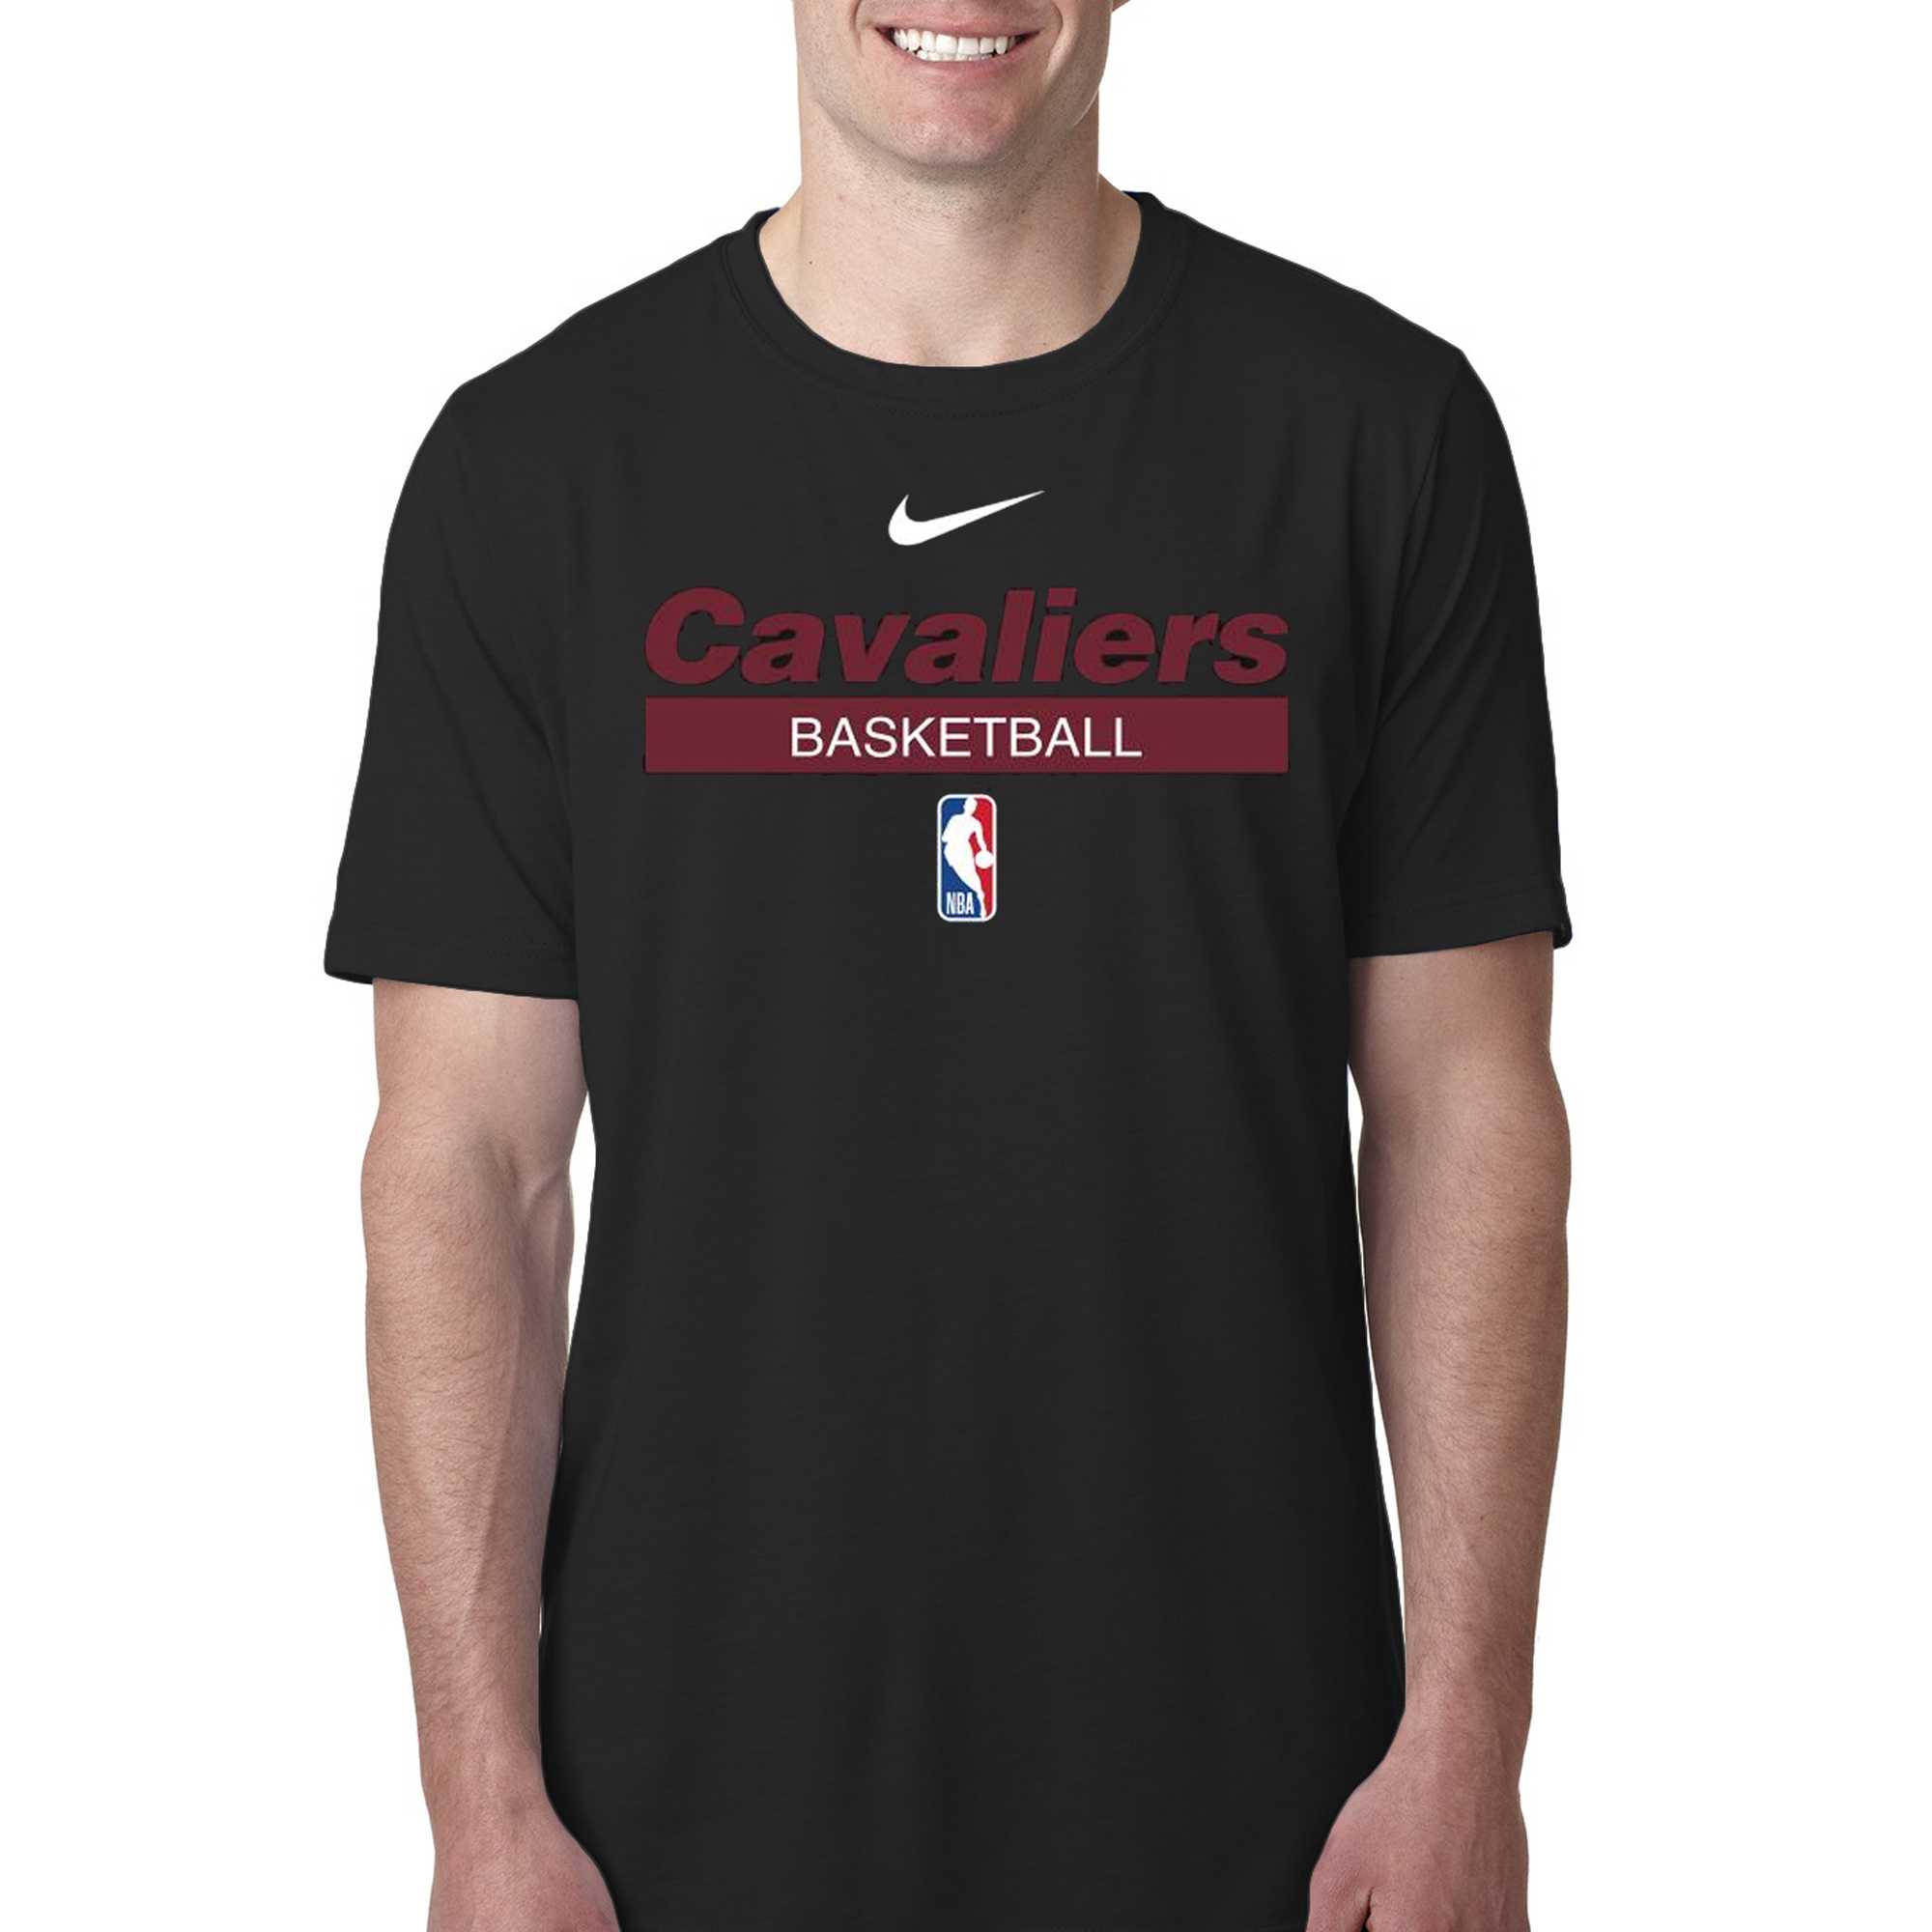 cleveland cavaliers clothing